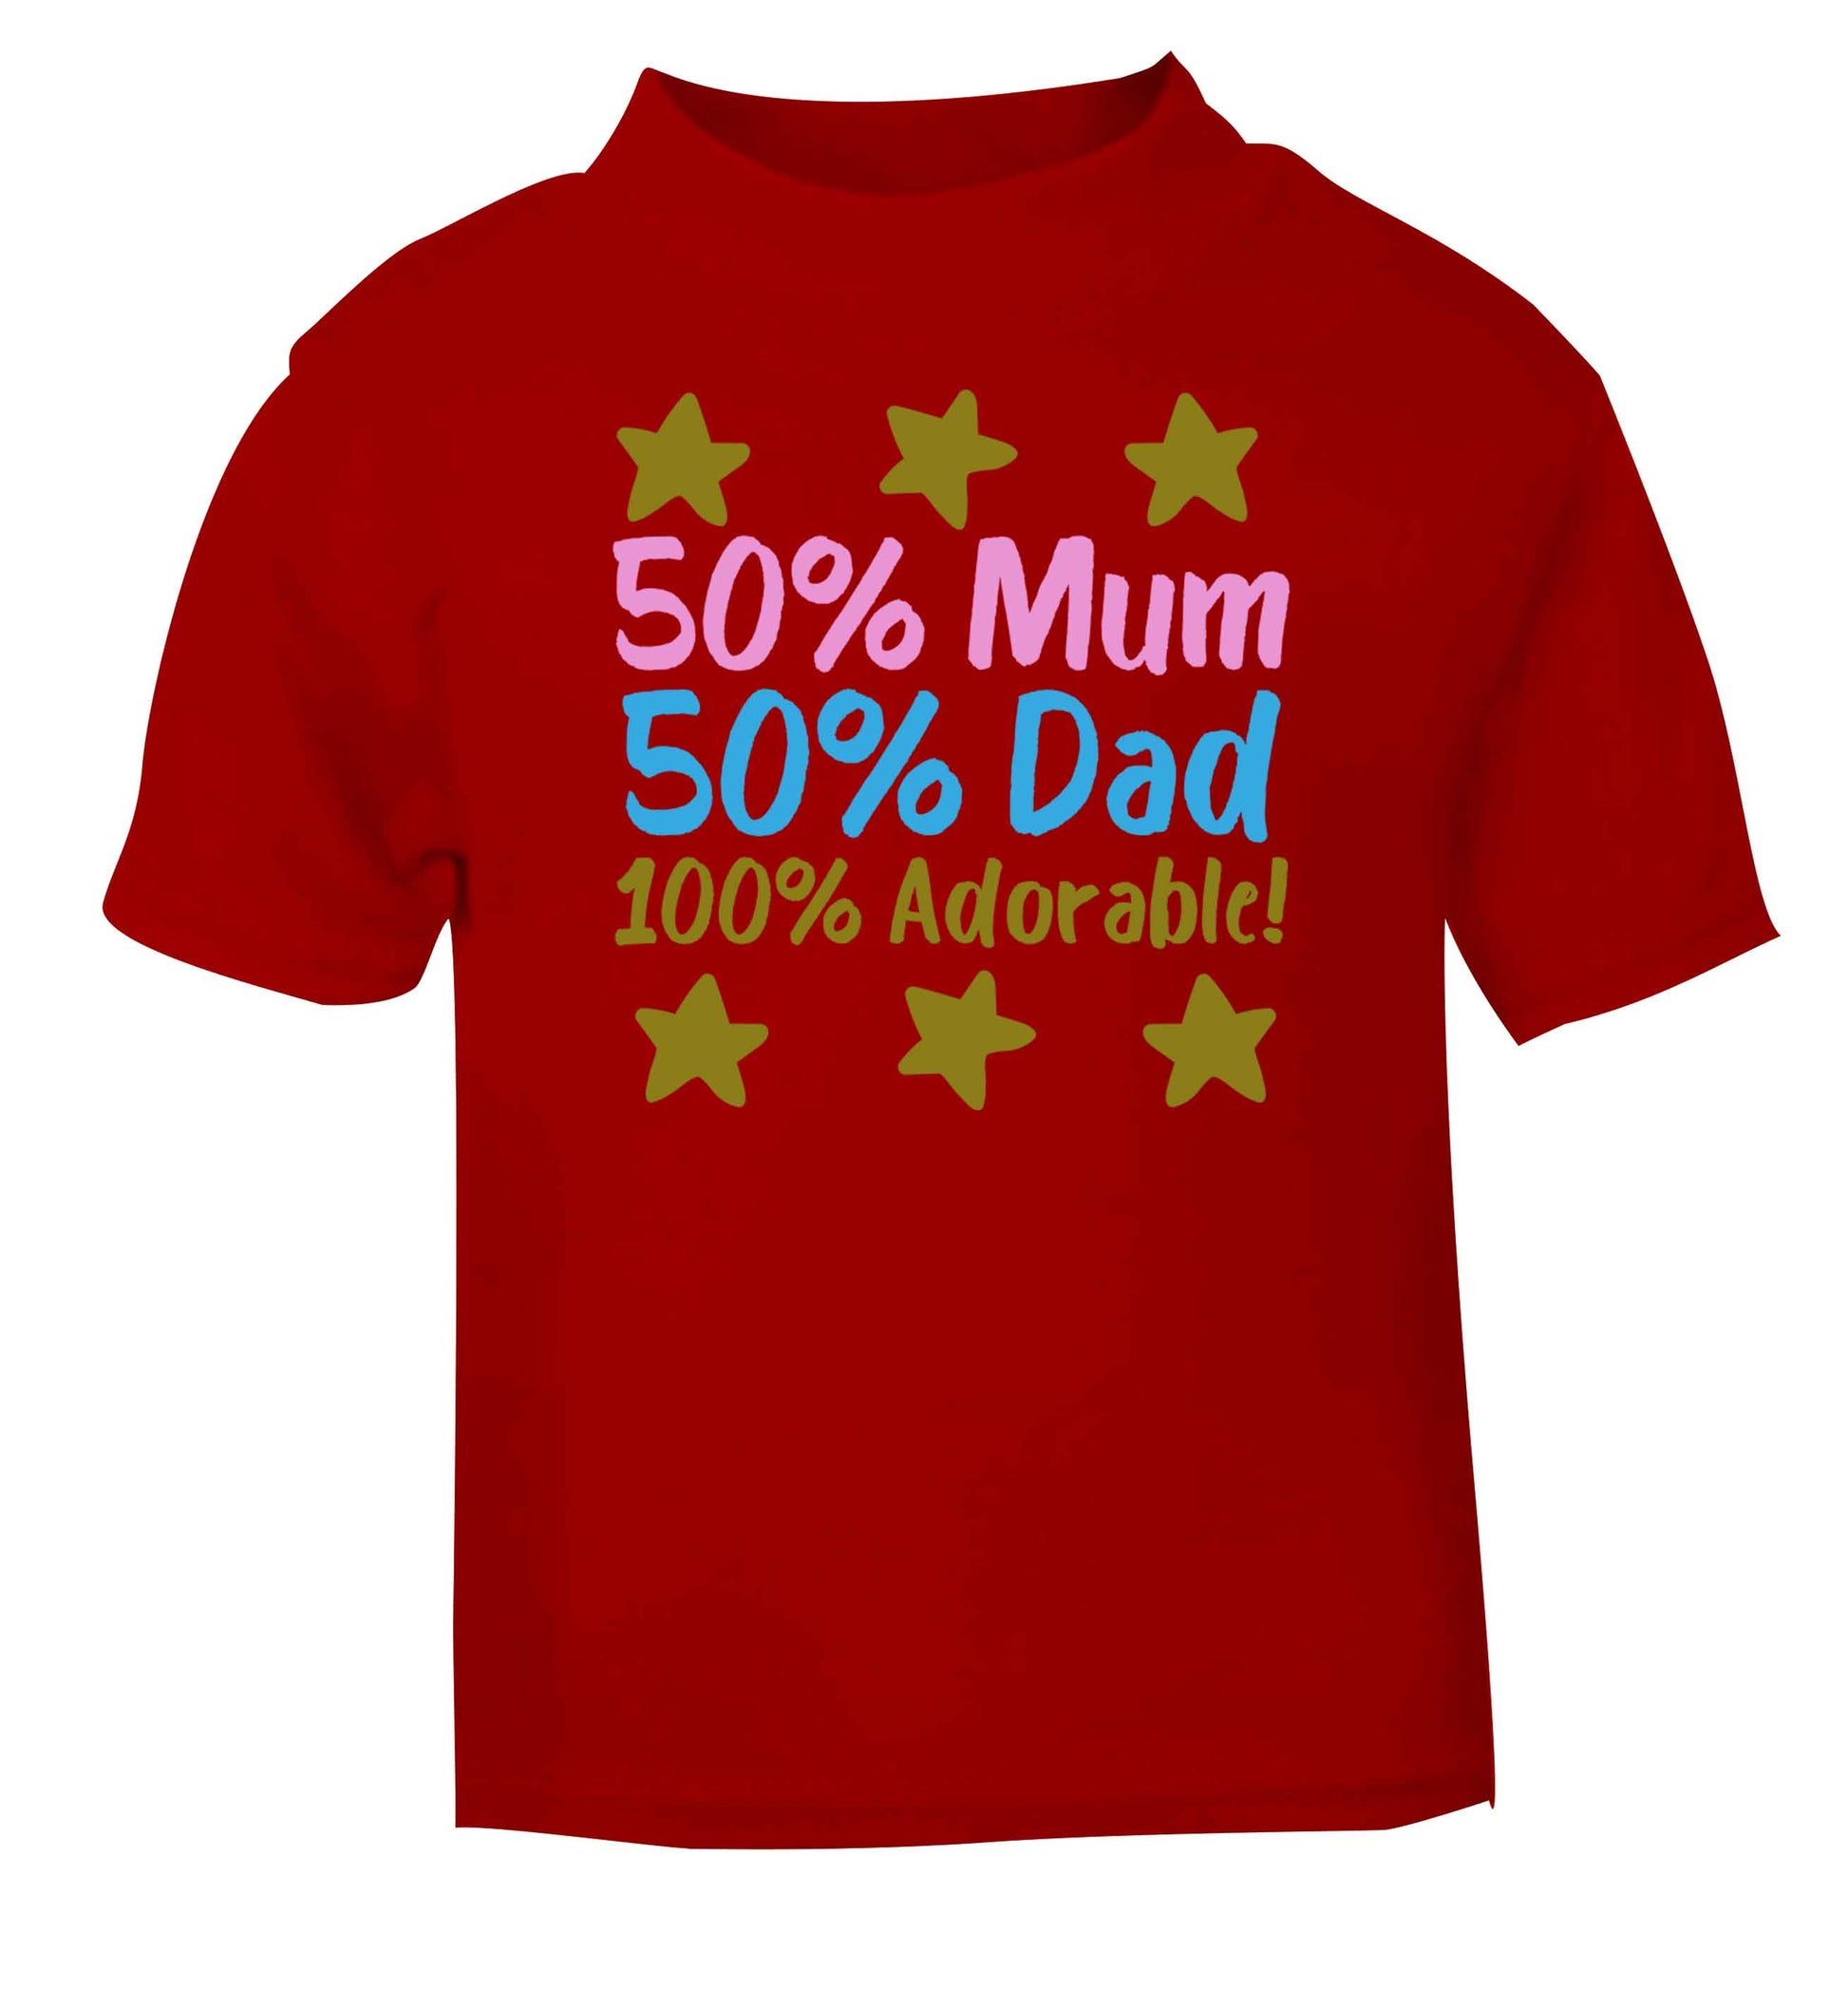 50% mum 50% dad 100% adorable red baby toddler Tshirt 2 Years